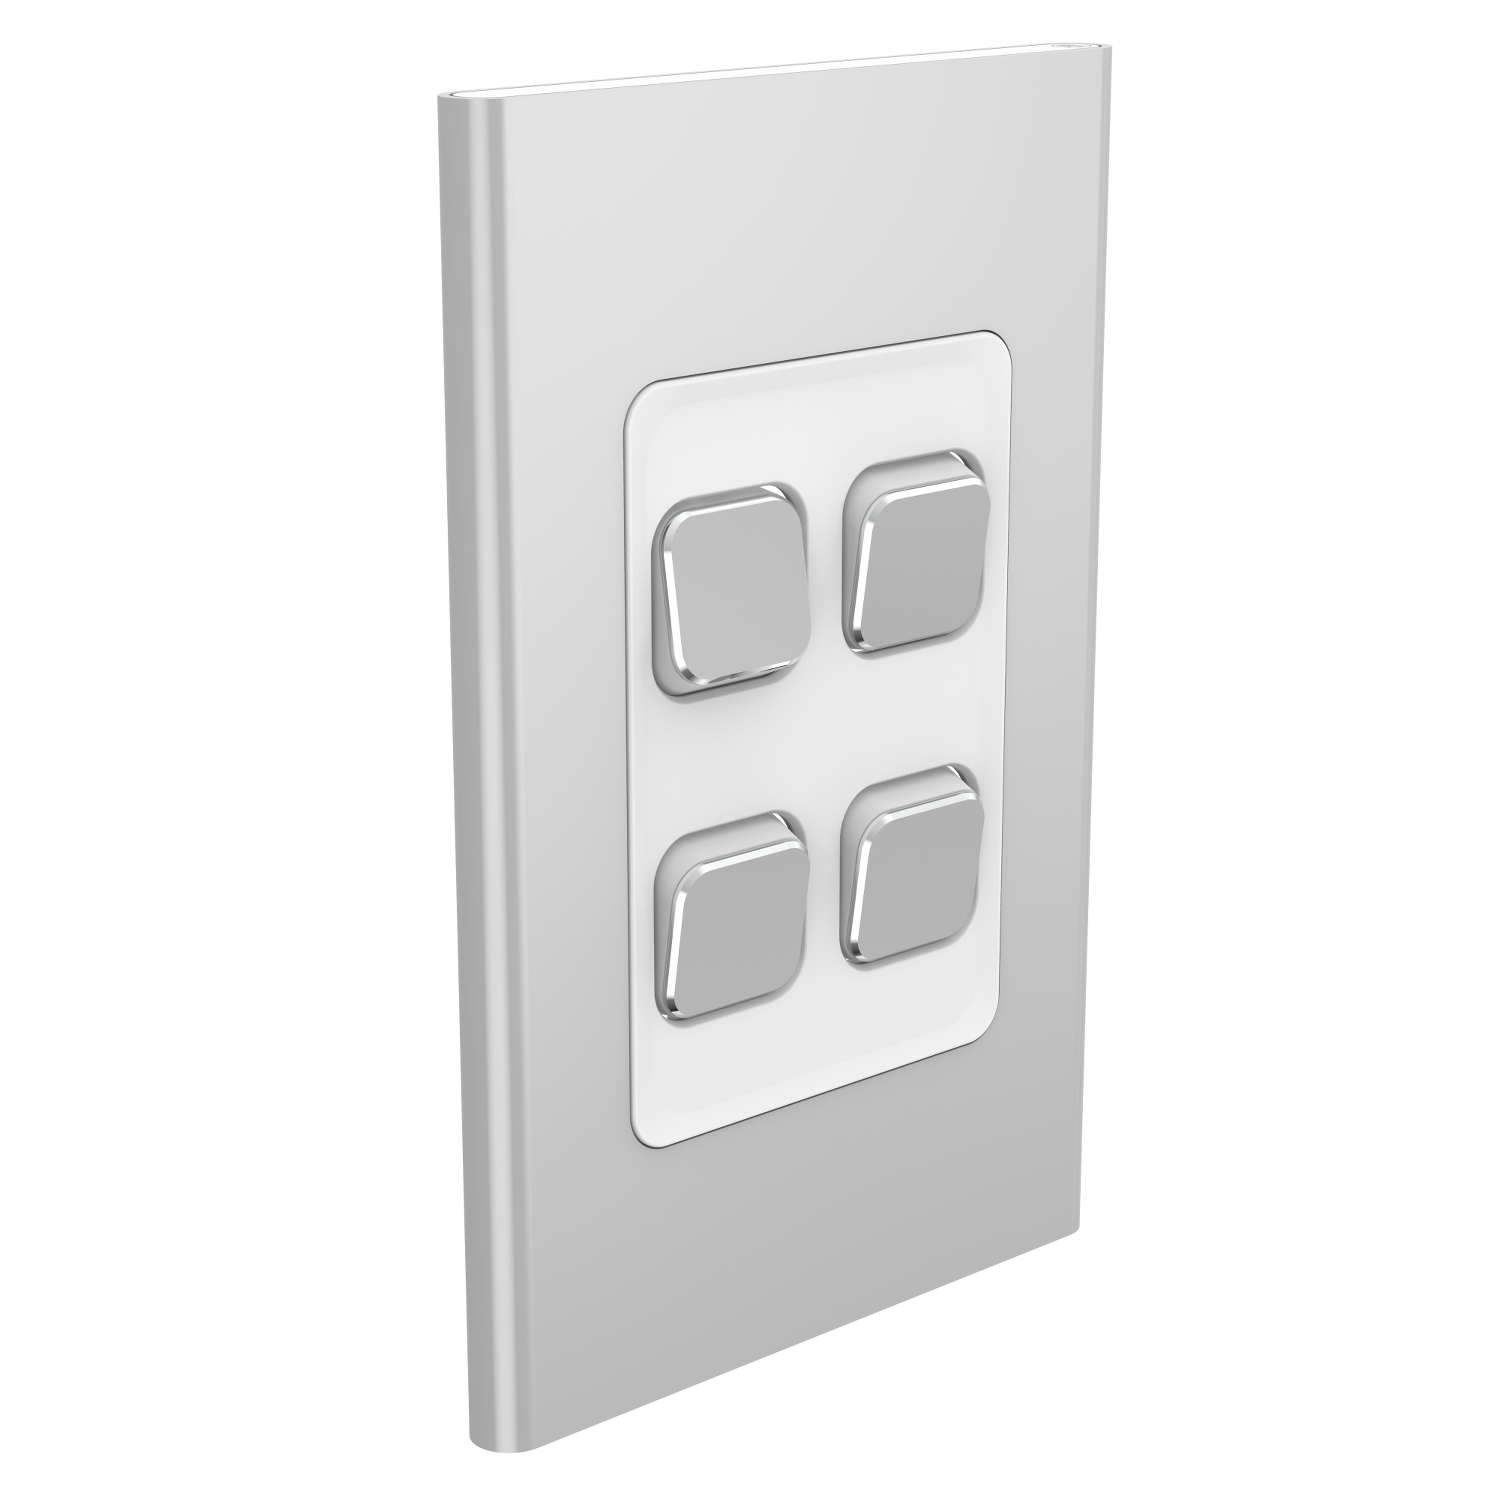 PDL Iconic Styl, cover frame, 4 switches, vertical - Silver